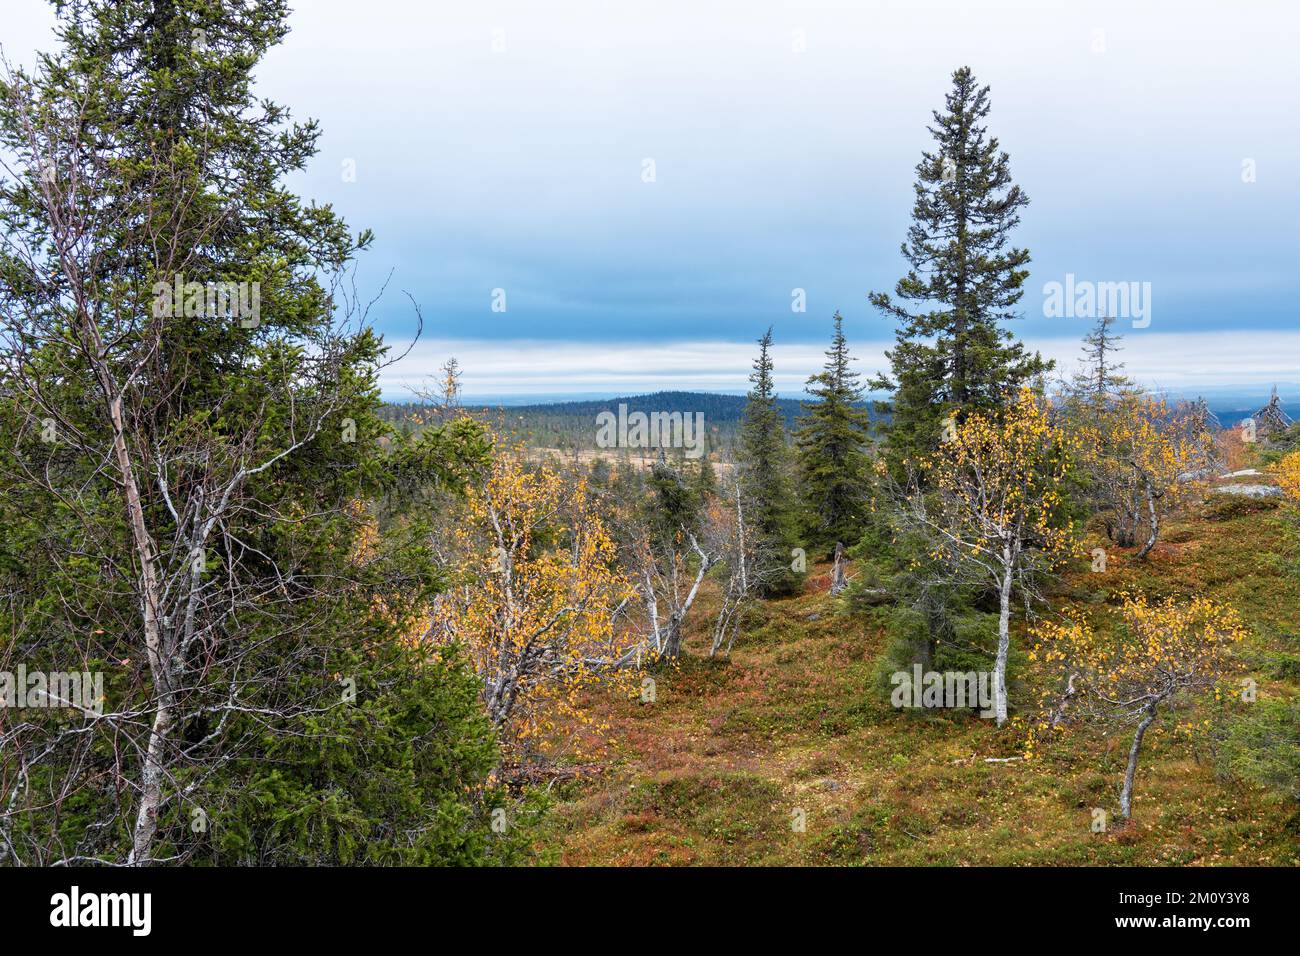 A view to an autumnal taiga landscape during a cloudy day in Riisitunturi National Park, Northern Finland Stock Photo